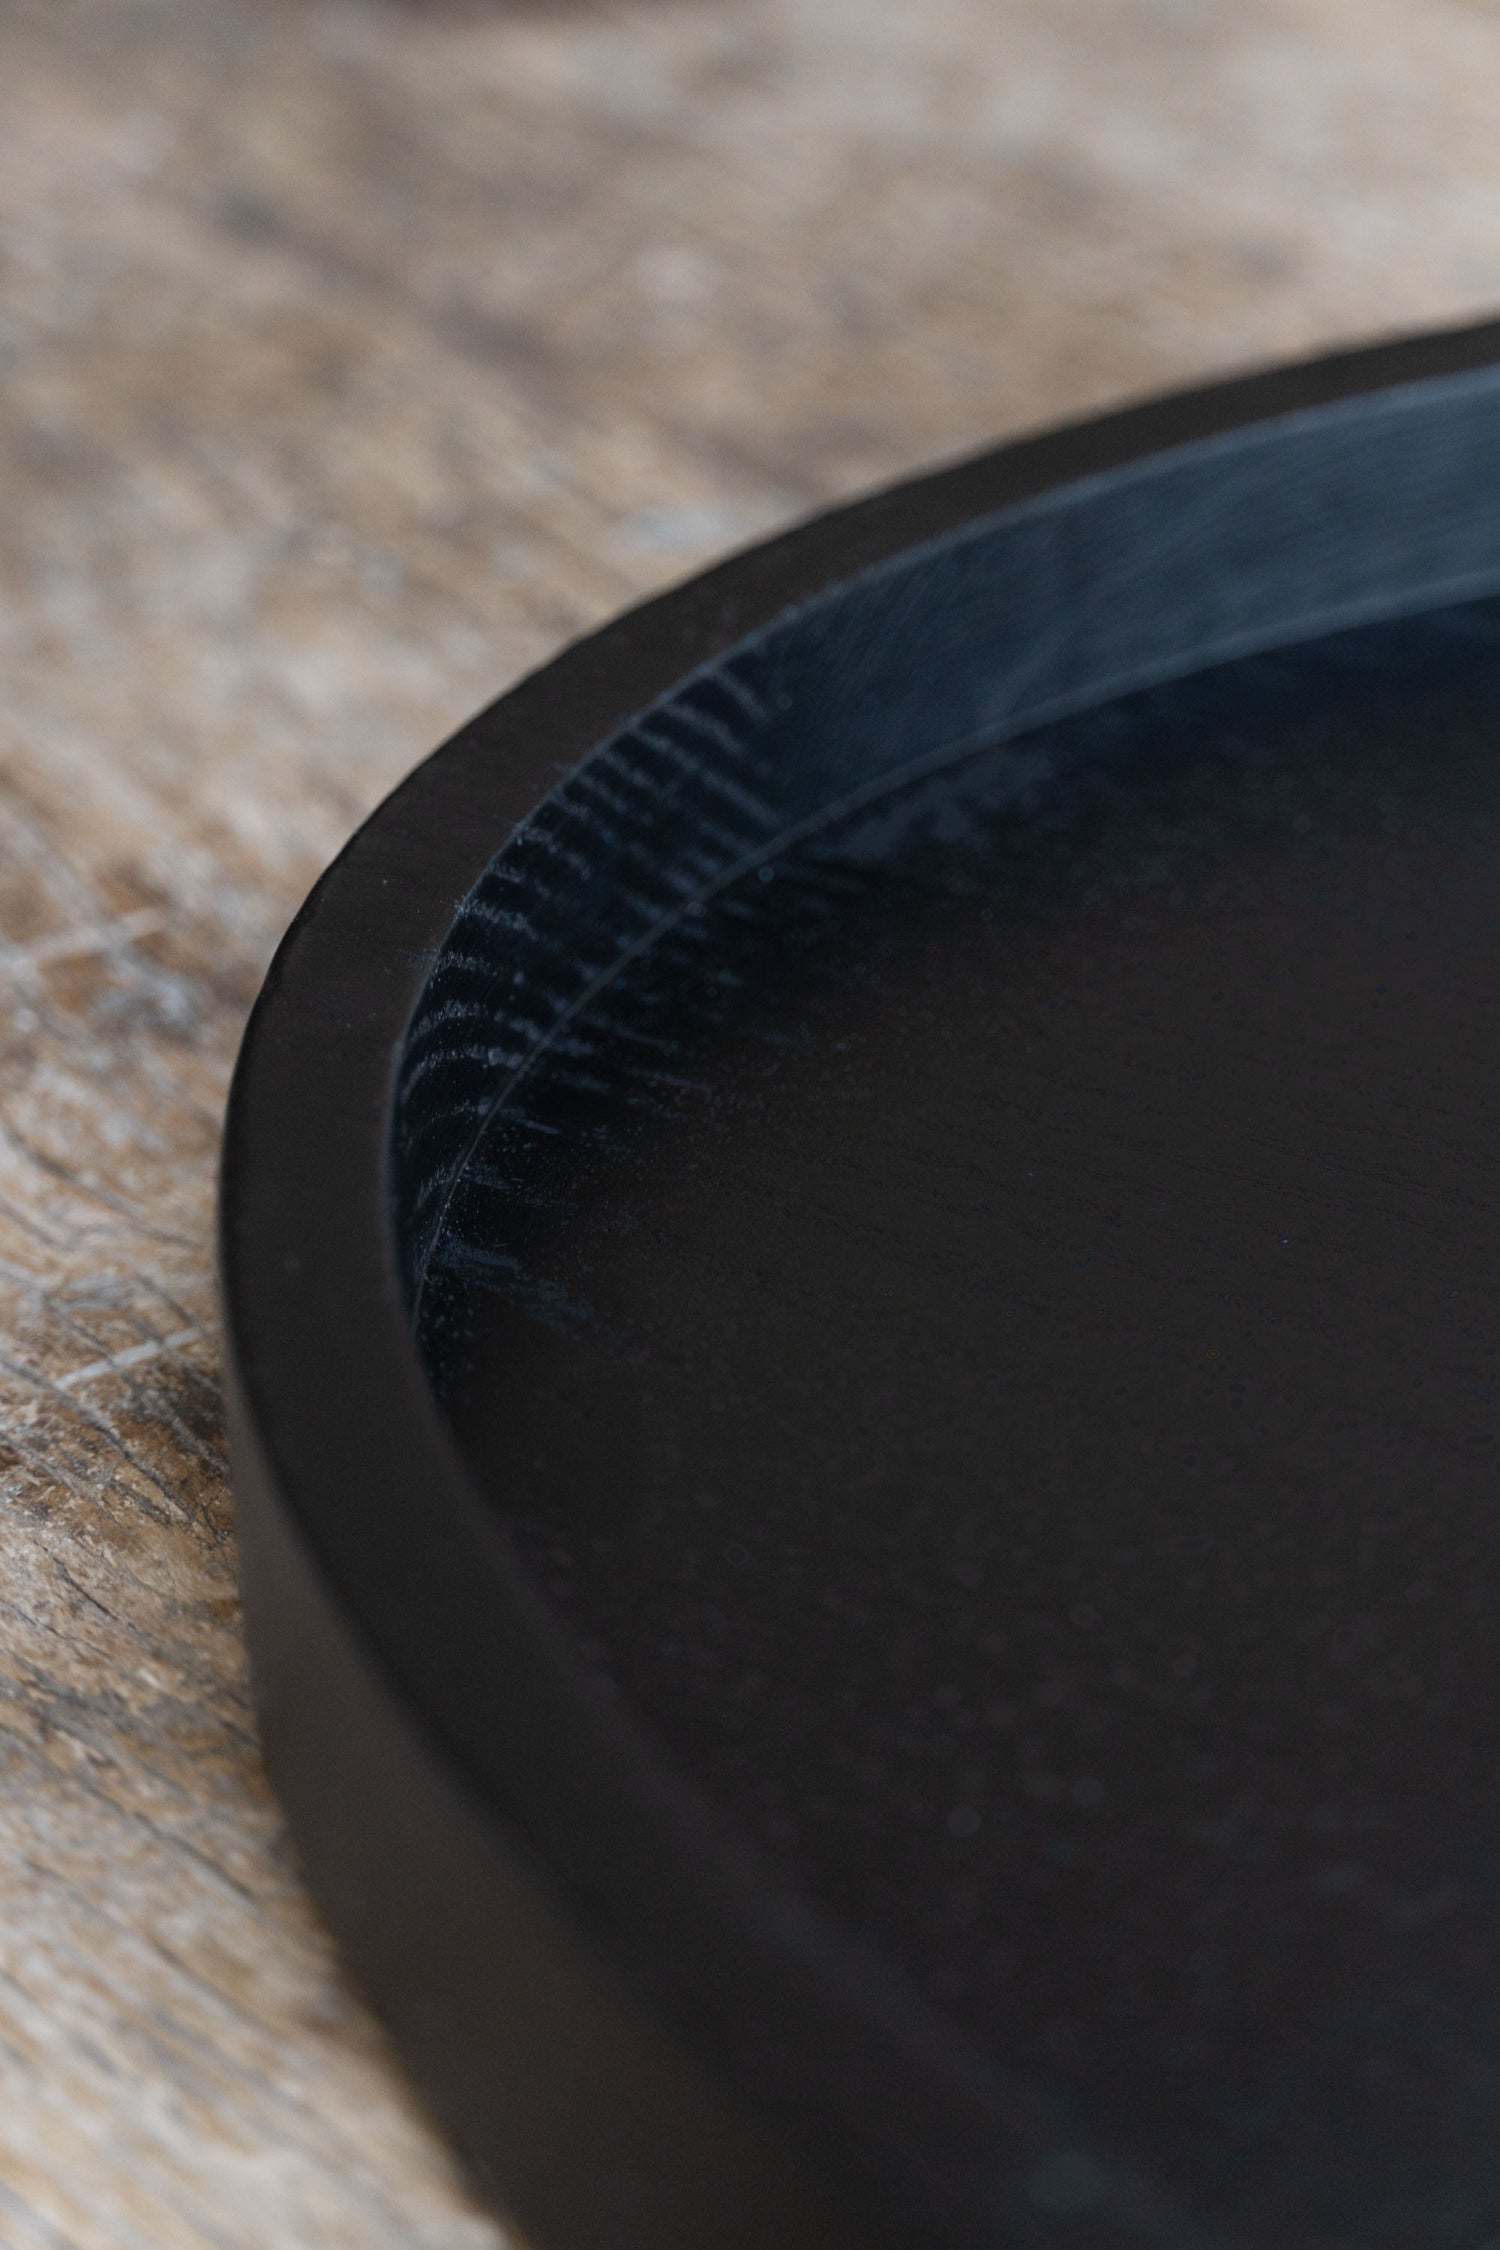 Details of the border of the Serax Vincent van Duysen Passe-Partout Round Tray Black – Enter The Loft